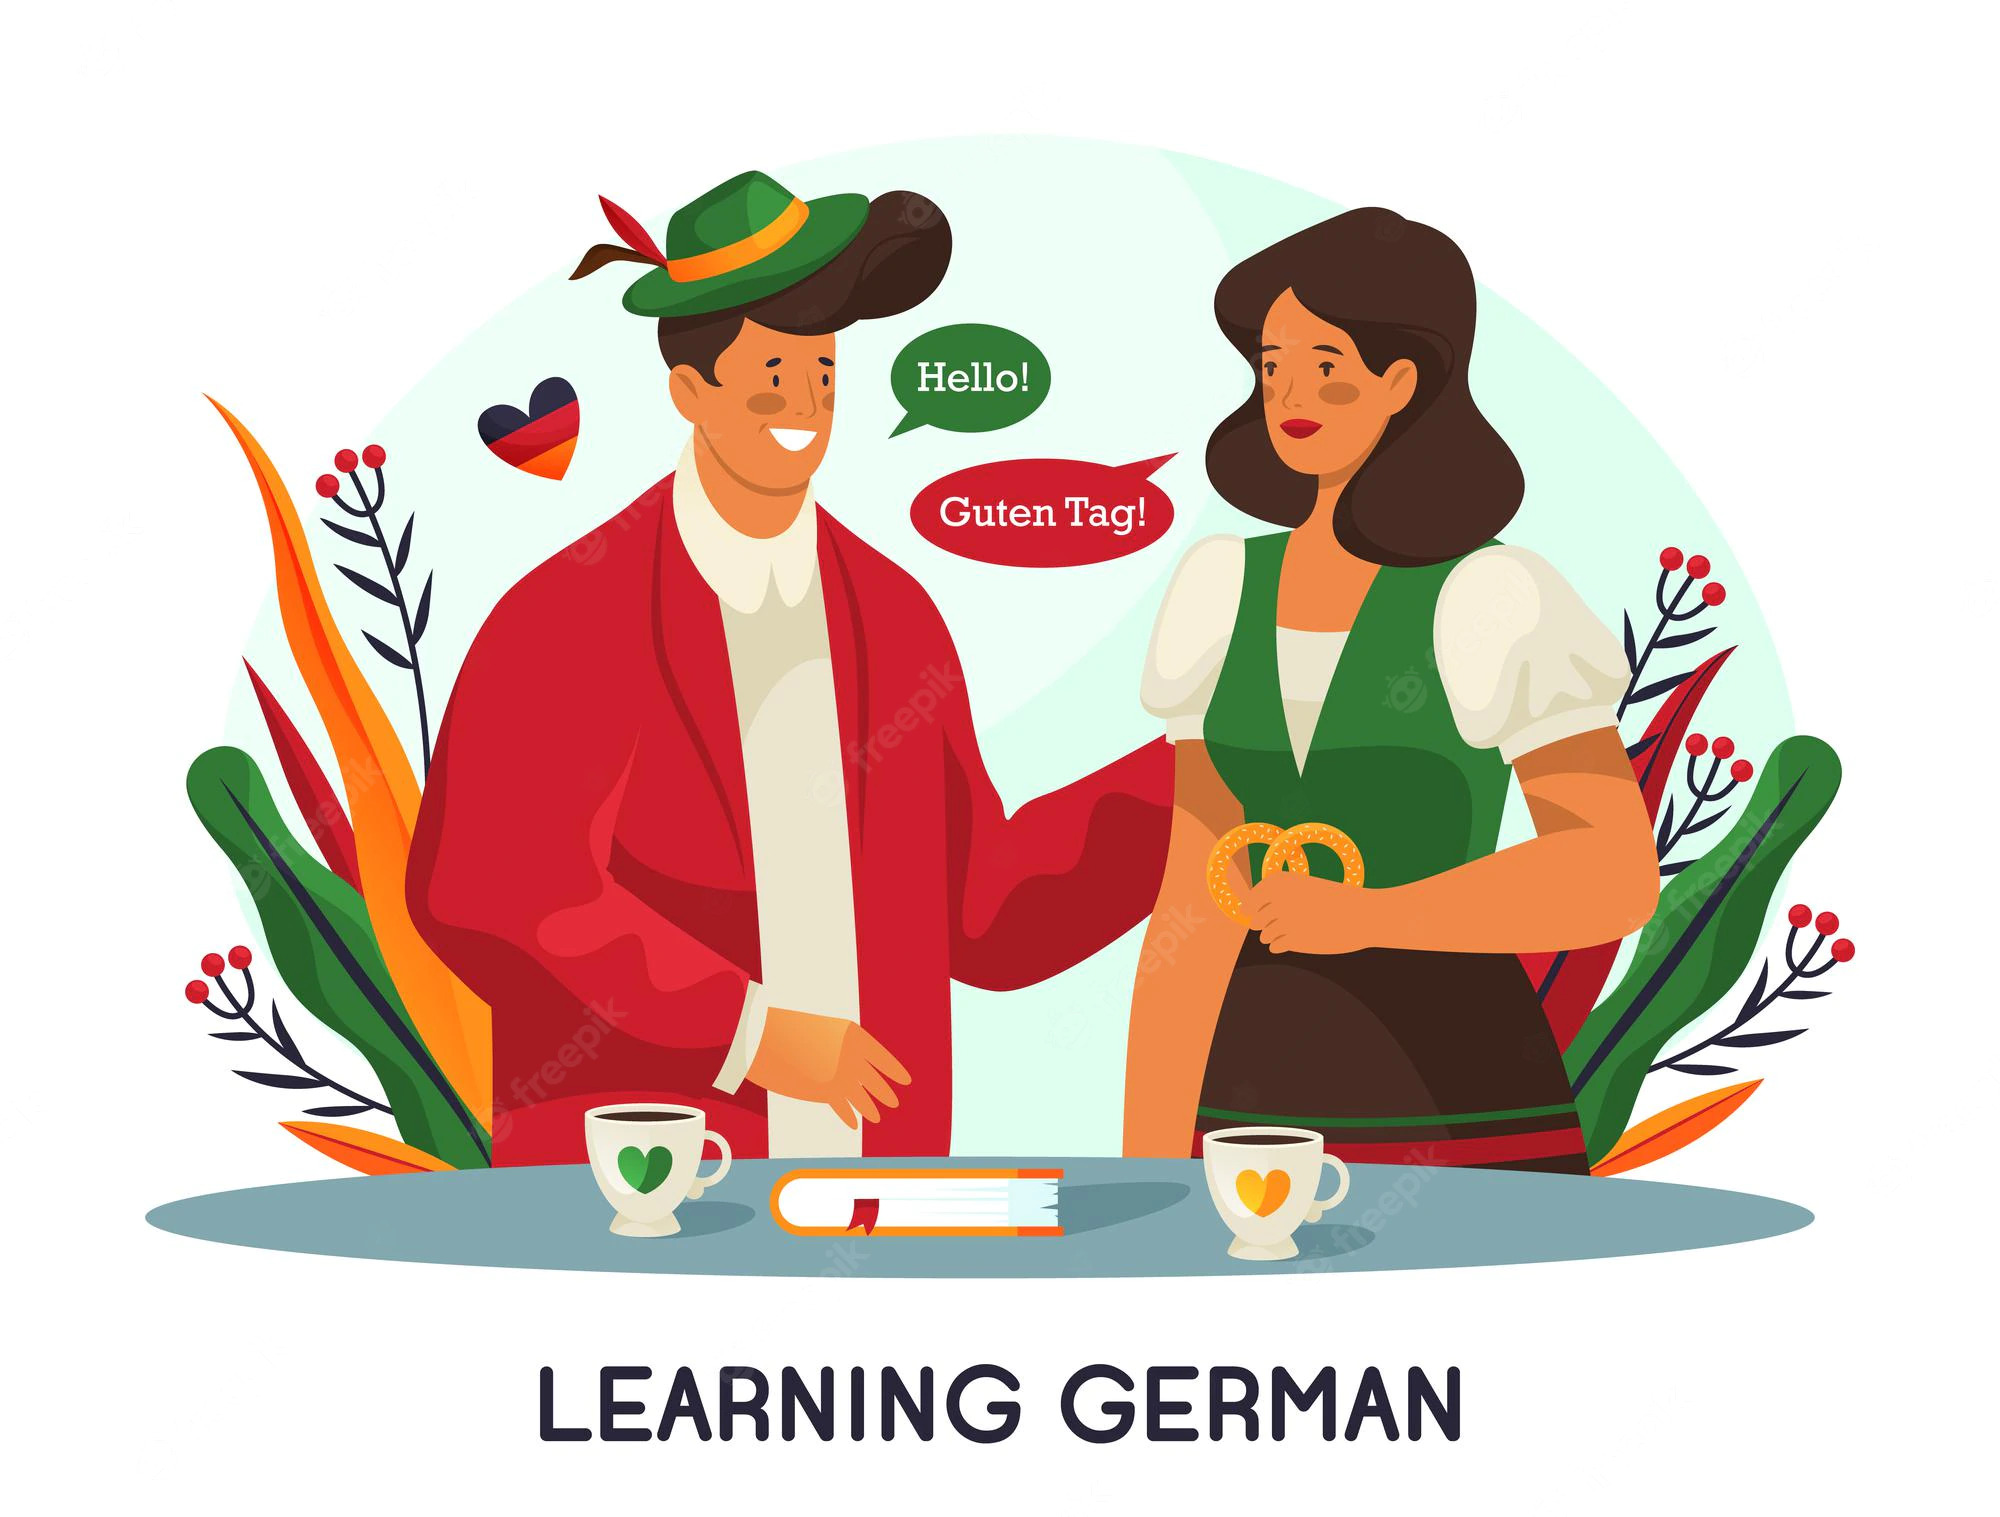 germans-talk-have-conversation-learning-german-language-lesson-with-tutor-teacher-communication-vector-banner-background-study-tradition-culture-education-theme_570502-54